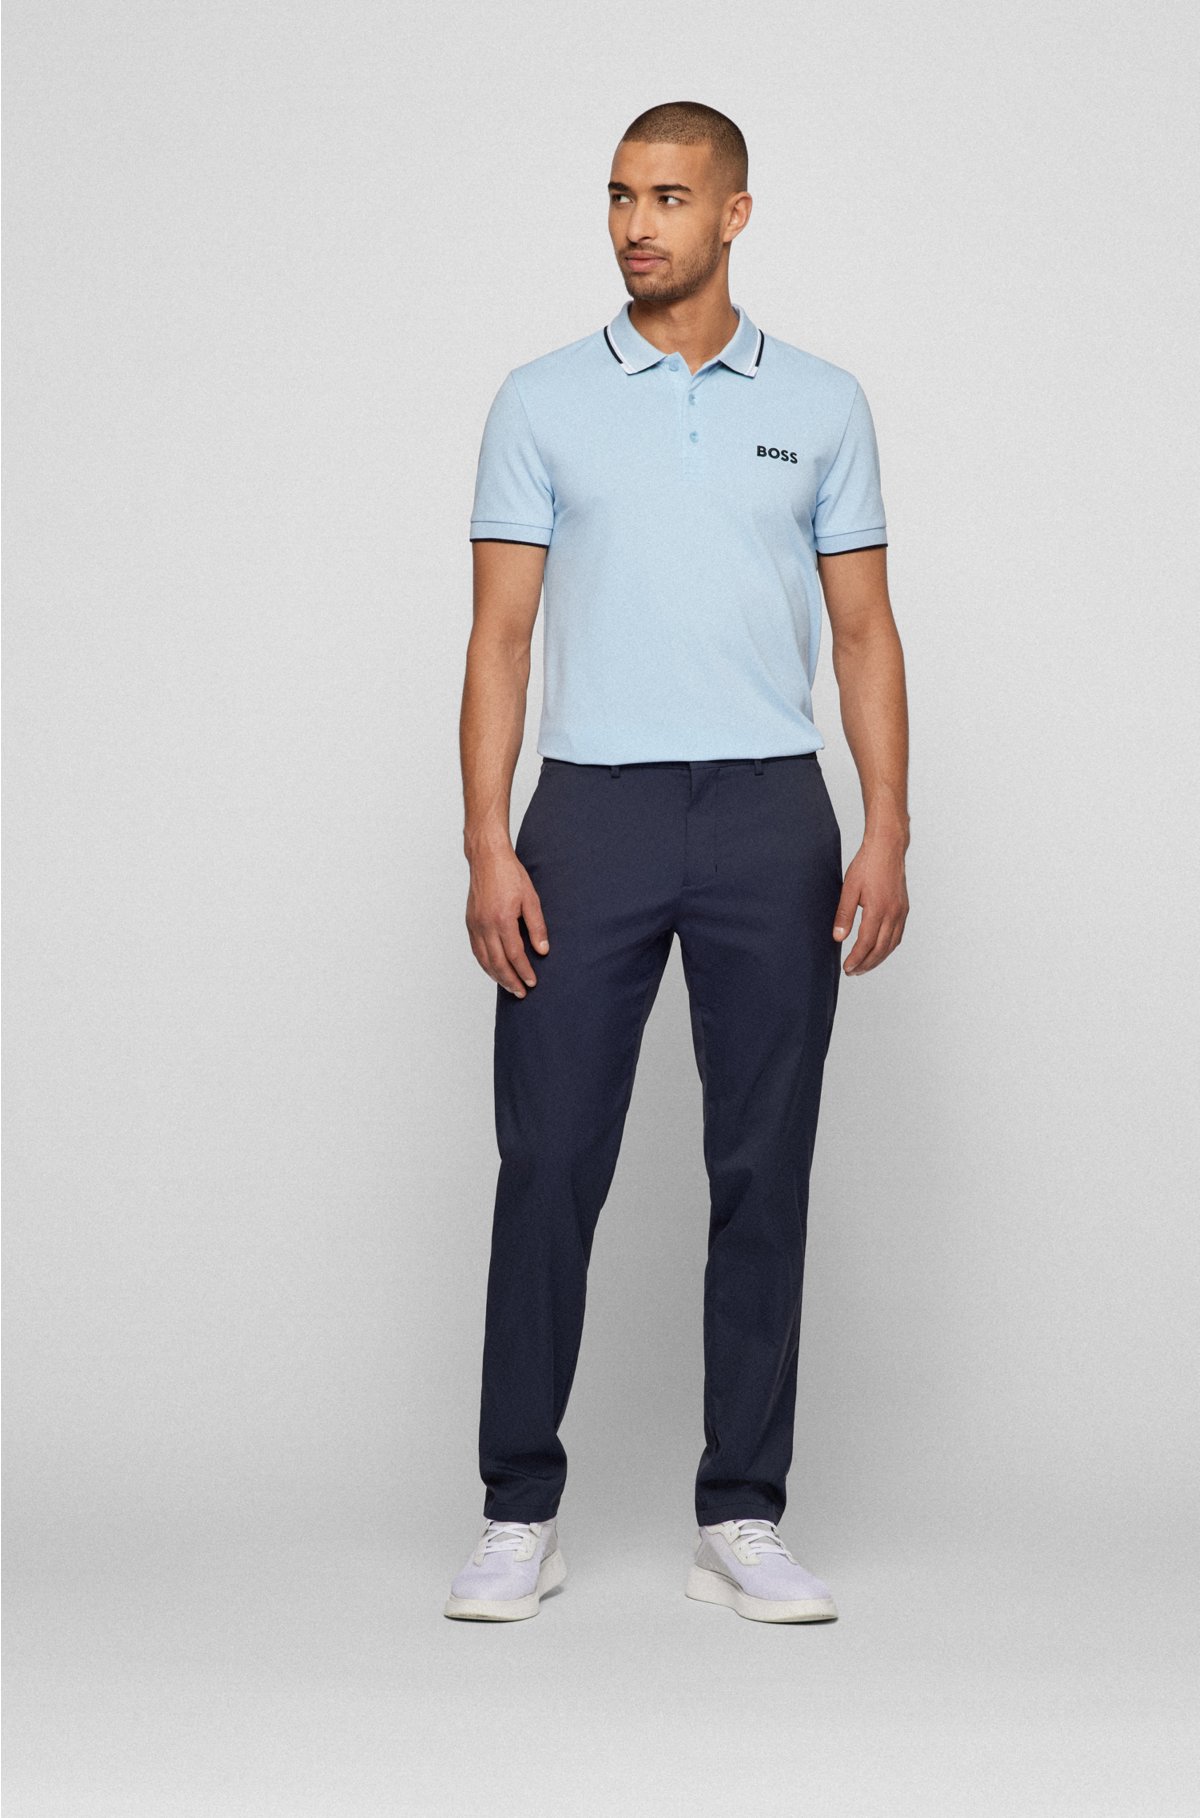 Cotton-blend with shirt - contrast polo BOSS details